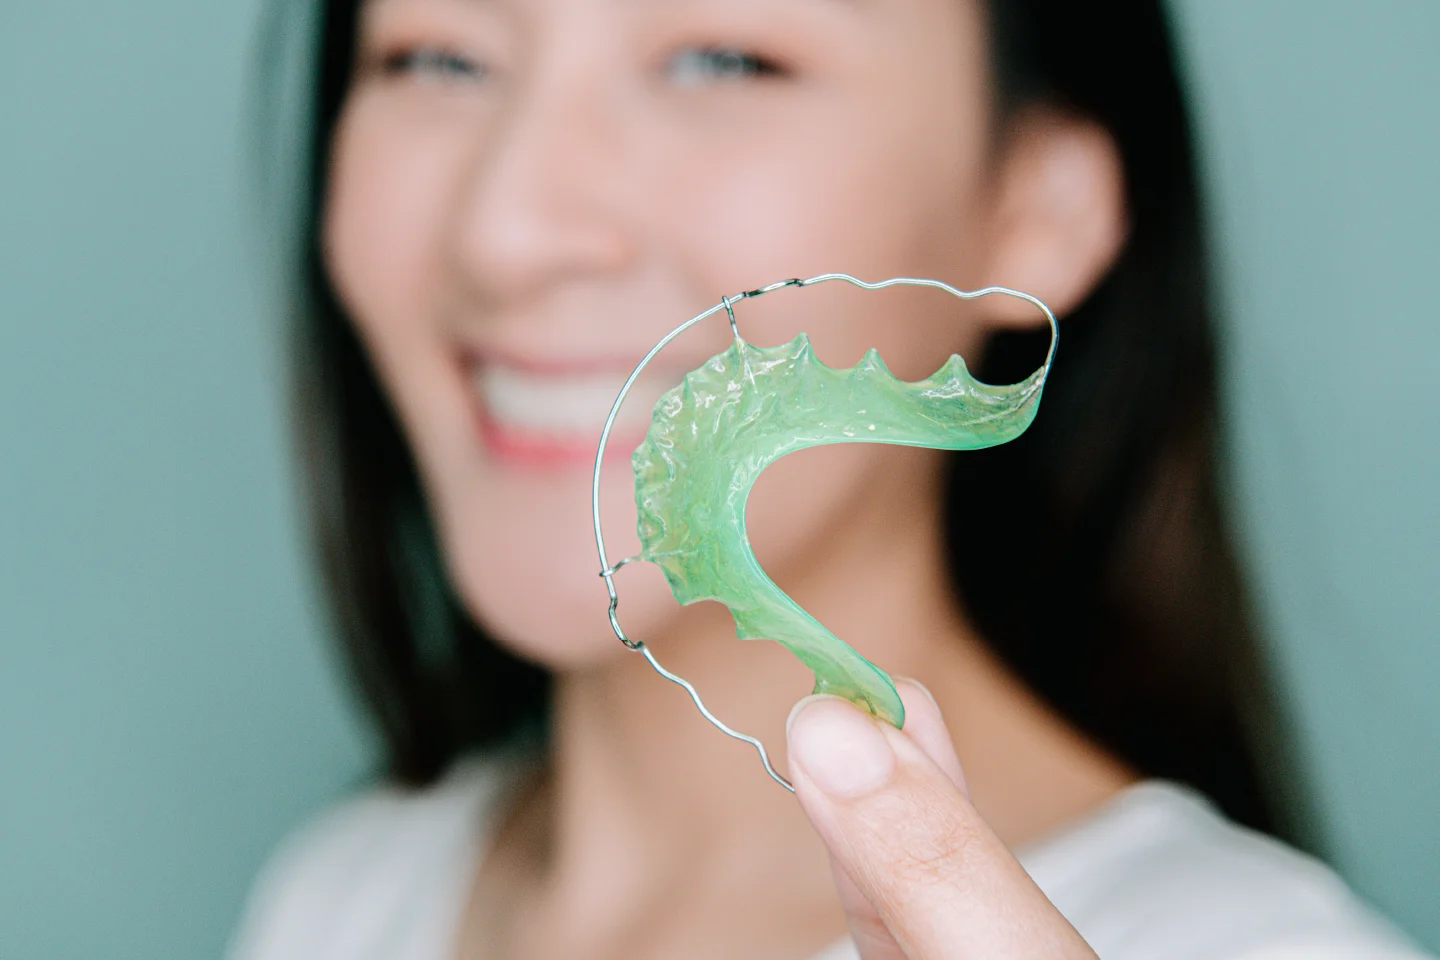 Dental Retainers: Indications, Types And Care